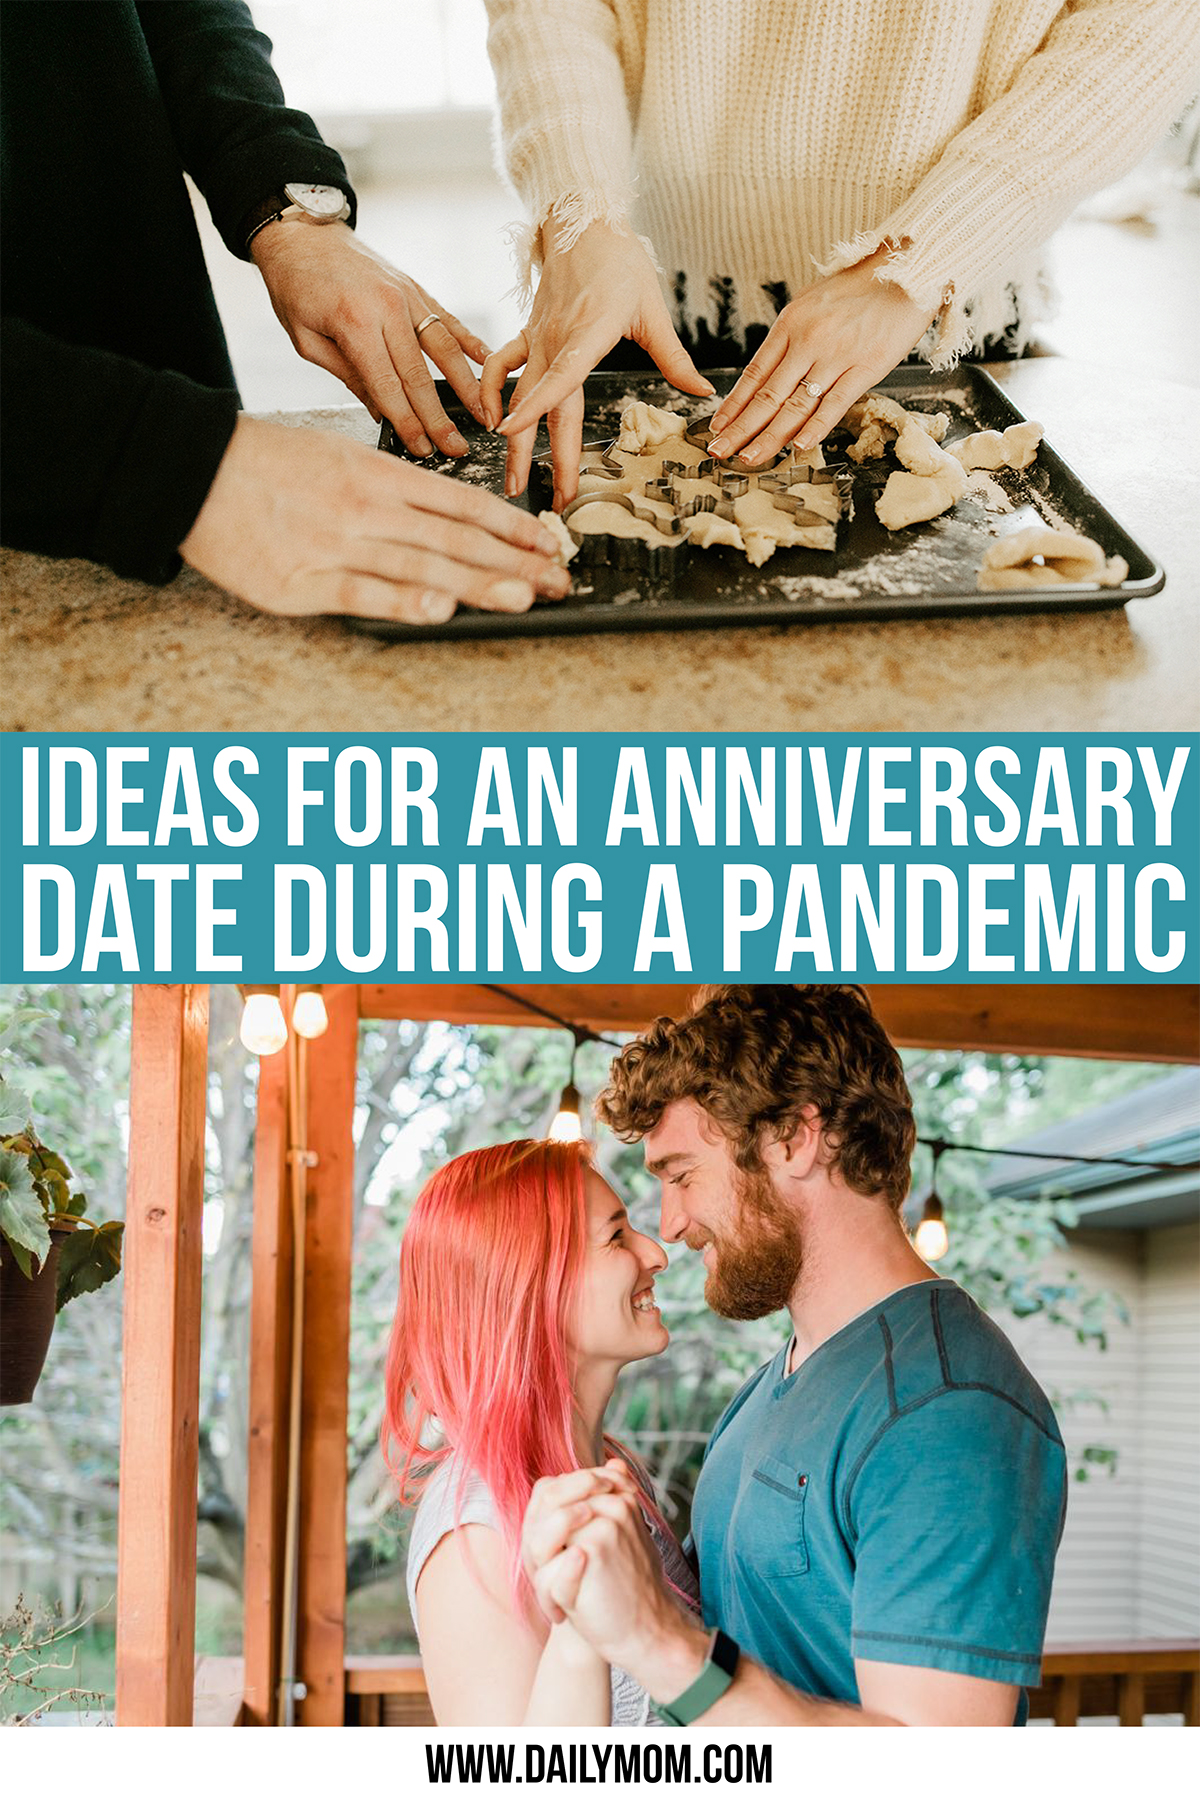 Simple Celebration Ideas For An Anniversary During A Pandemic